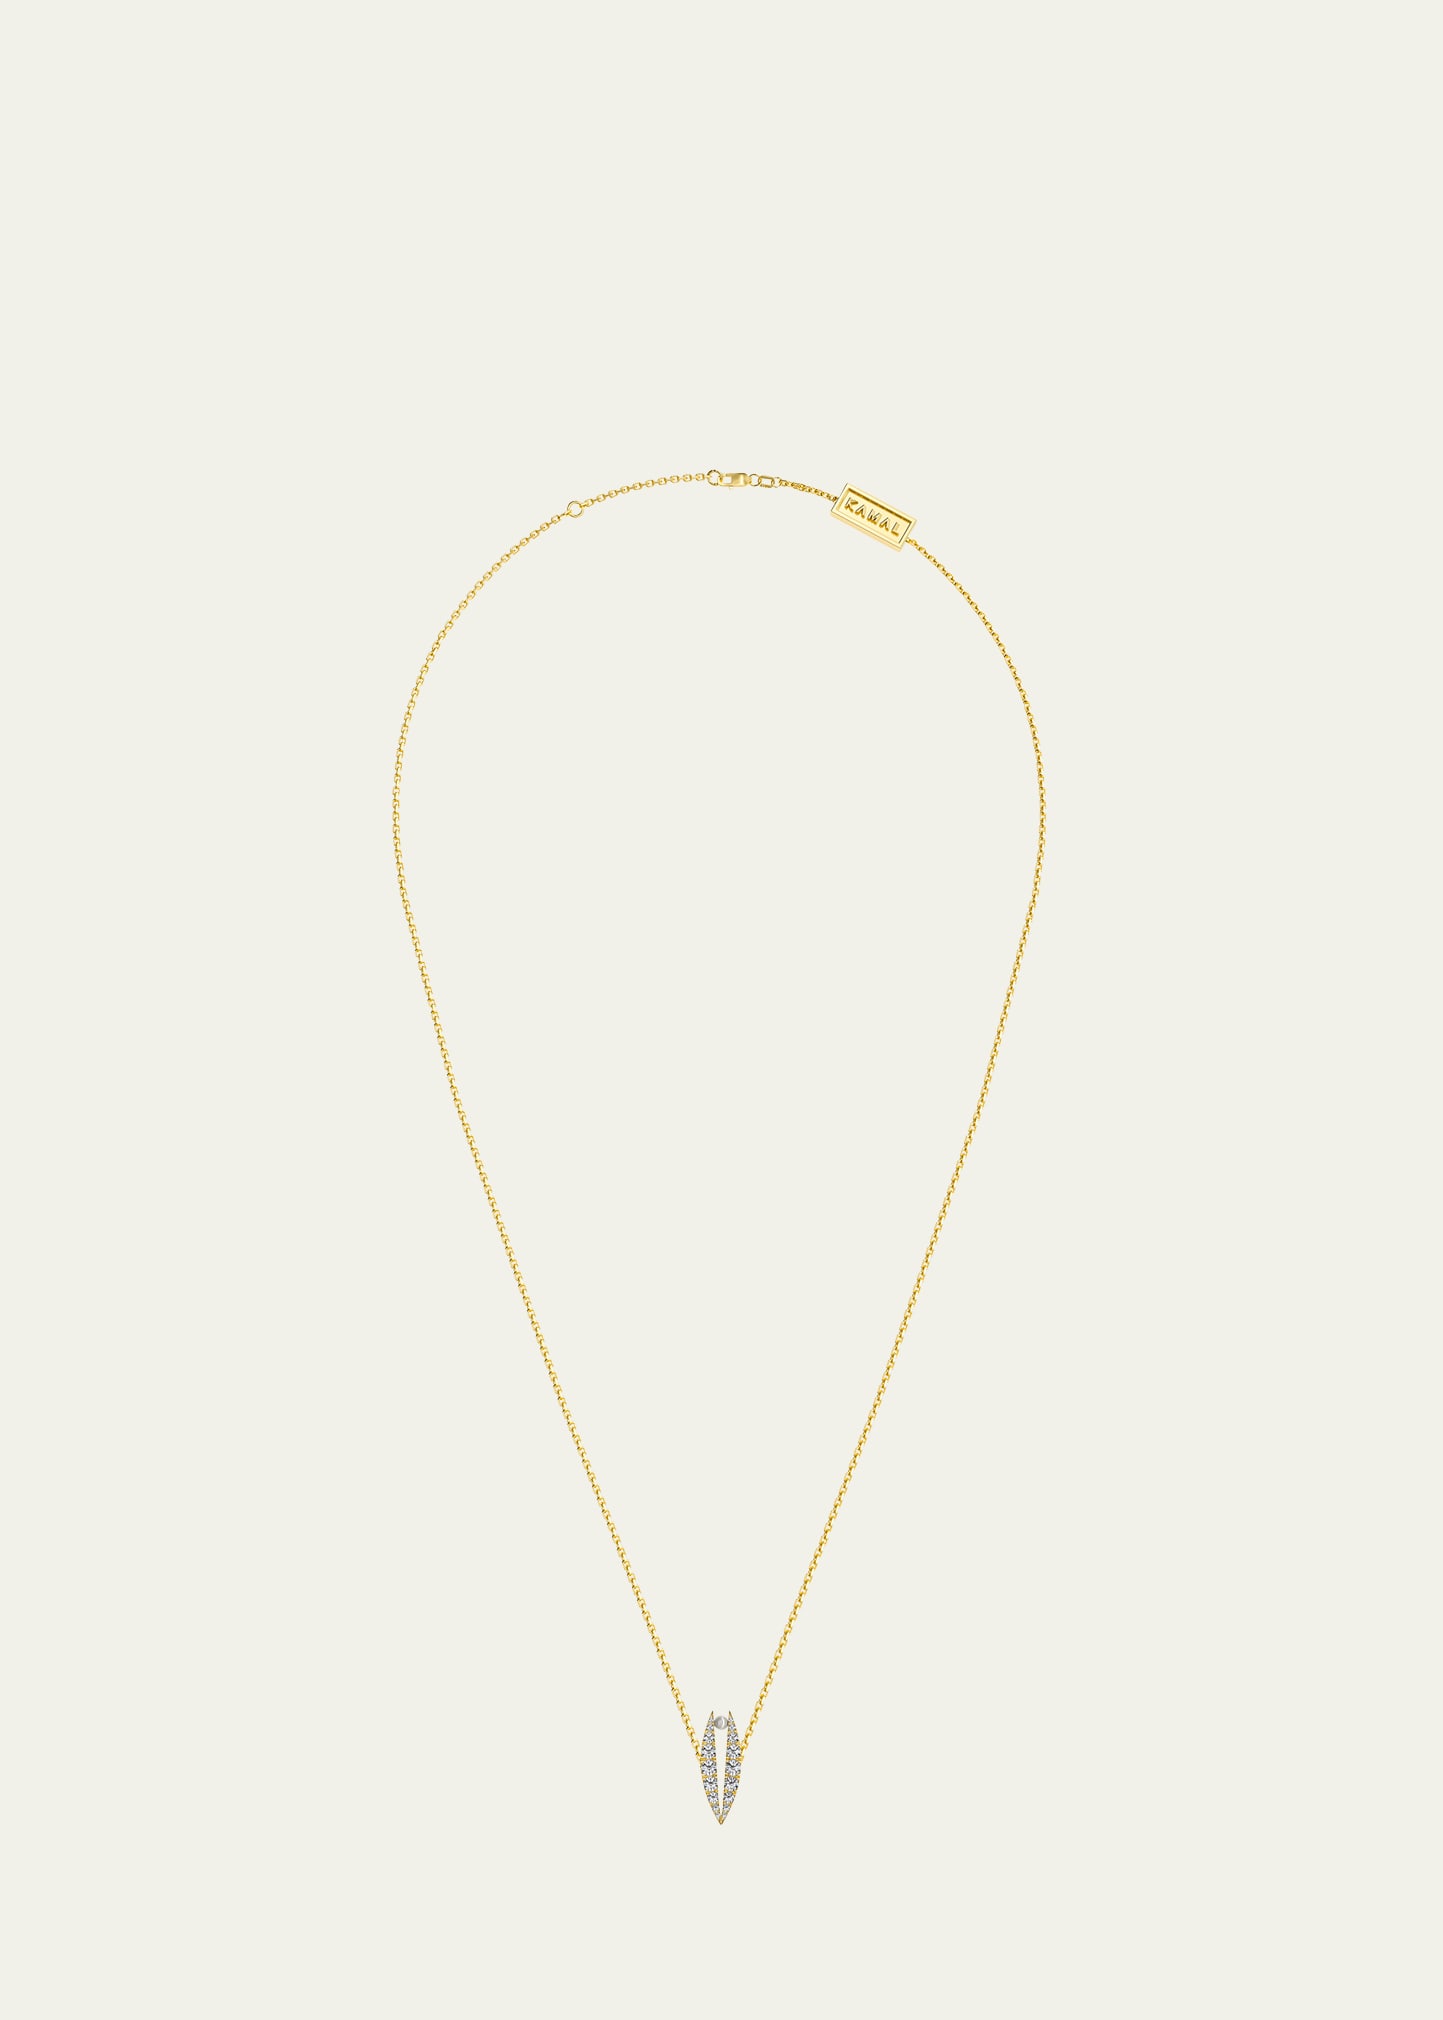 Lotus Necklace in Yellow Gold, Diamonds and Pearl